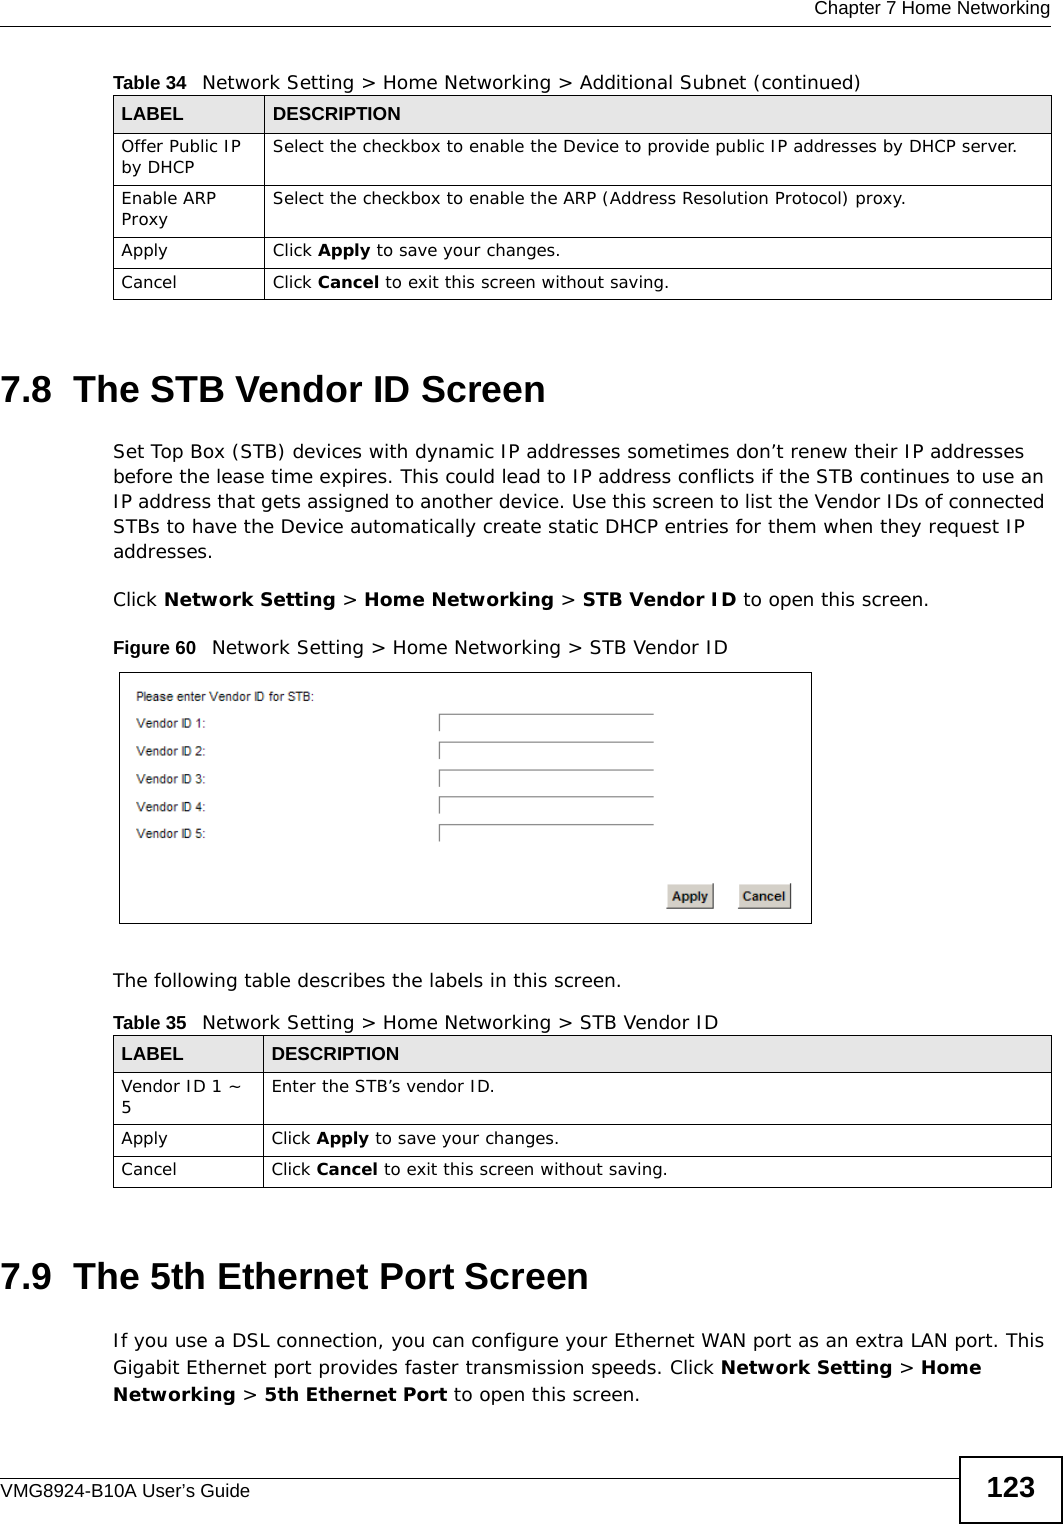  Chapter 7 Home NetworkingVMG8924-B10A User’s Guide 1237.8  The STB Vendor ID ScreenSet Top Box (STB) devices with dynamic IP addresses sometimes don’t renew their IP addresses before the lease time expires. This could lead to IP address conflicts if the STB continues to use an IP address that gets assigned to another device. Use this screen to list the Vendor IDs of connected STBs to have the Device automatically create static DHCP entries for them when they request IP addresses.Click Network Setting &gt; Home Networking &gt; STB Vendor ID to open this screen. Figure 60   Network Setting &gt; Home Networking &gt; STB Vendor IDThe following table describes the labels in this screen.7.9  The 5th Ethernet Port ScreenIf you use a DSL connection, you can configure your Ethernet WAN port as an extra LAN port. This Gigabit Ethernet port provides faster transmission speeds. Click Network Setting &gt; Home Networking &gt; 5th Ethernet Port to open this screen.Offer Public IP by DHCP Select the checkbox to enable the Device to provide public IP addresses by DHCP server.Enable ARP Proxy Select the checkbox to enable the ARP (Address Resolution Protocol) proxy.Apply Click Apply to save your changes.Cancel Click Cancel to exit this screen without saving.Table 34   Network Setting &gt; Home Networking &gt; Additional Subnet (continued)LABEL DESCRIPTIONTable 35   Network Setting &gt; Home Networking &gt; STB Vendor IDLABEL DESCRIPTIONVendor ID 1 ~ 5Enter the STB’s vendor ID.Apply Click Apply to save your changes.Cancel Click Cancel to exit this screen without saving.